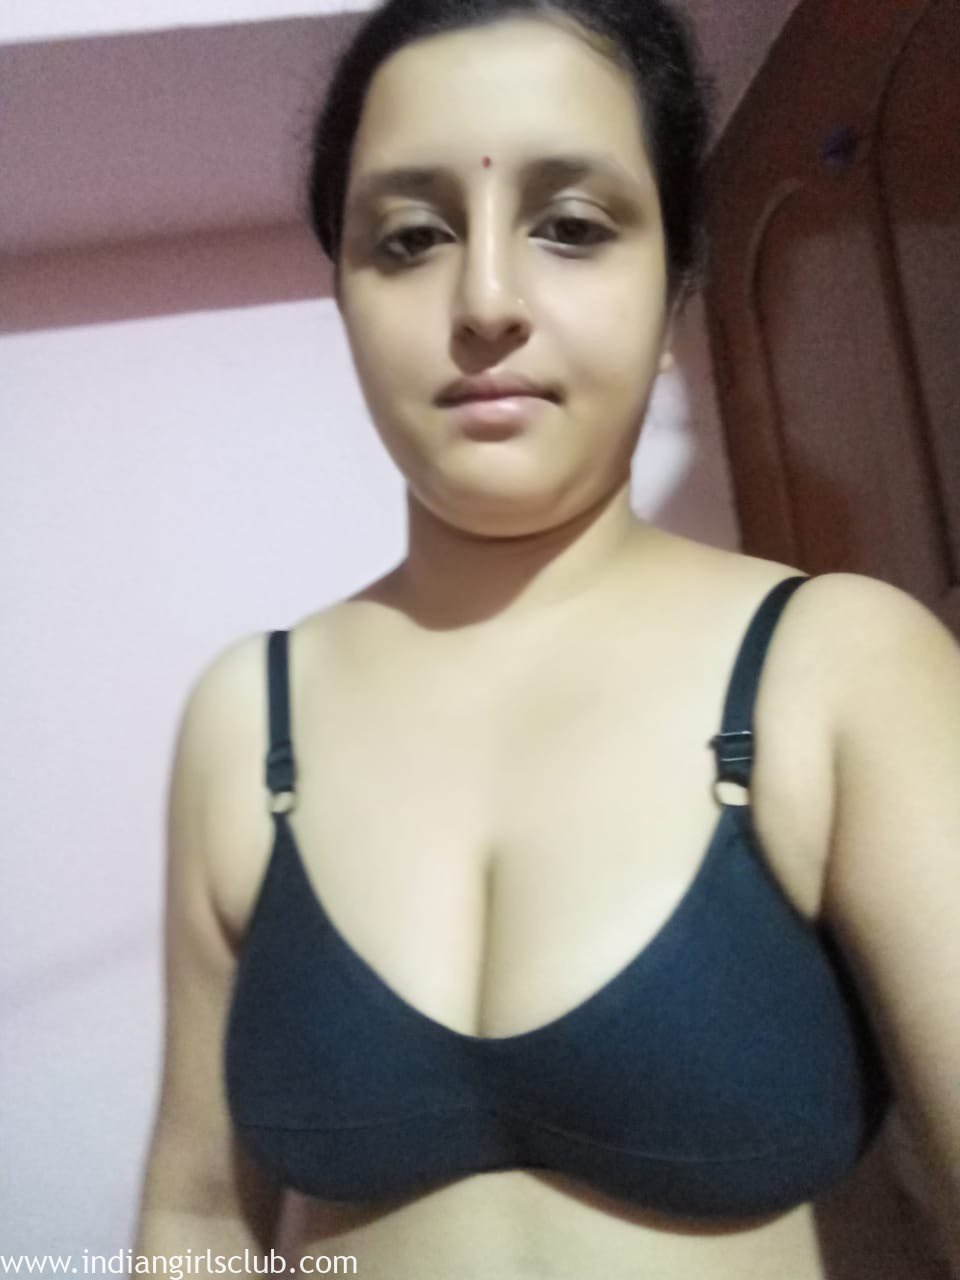 big-tits-bengali-indian-housewife-ready-for-hot-sex-10 - Indian Girls Club  pic